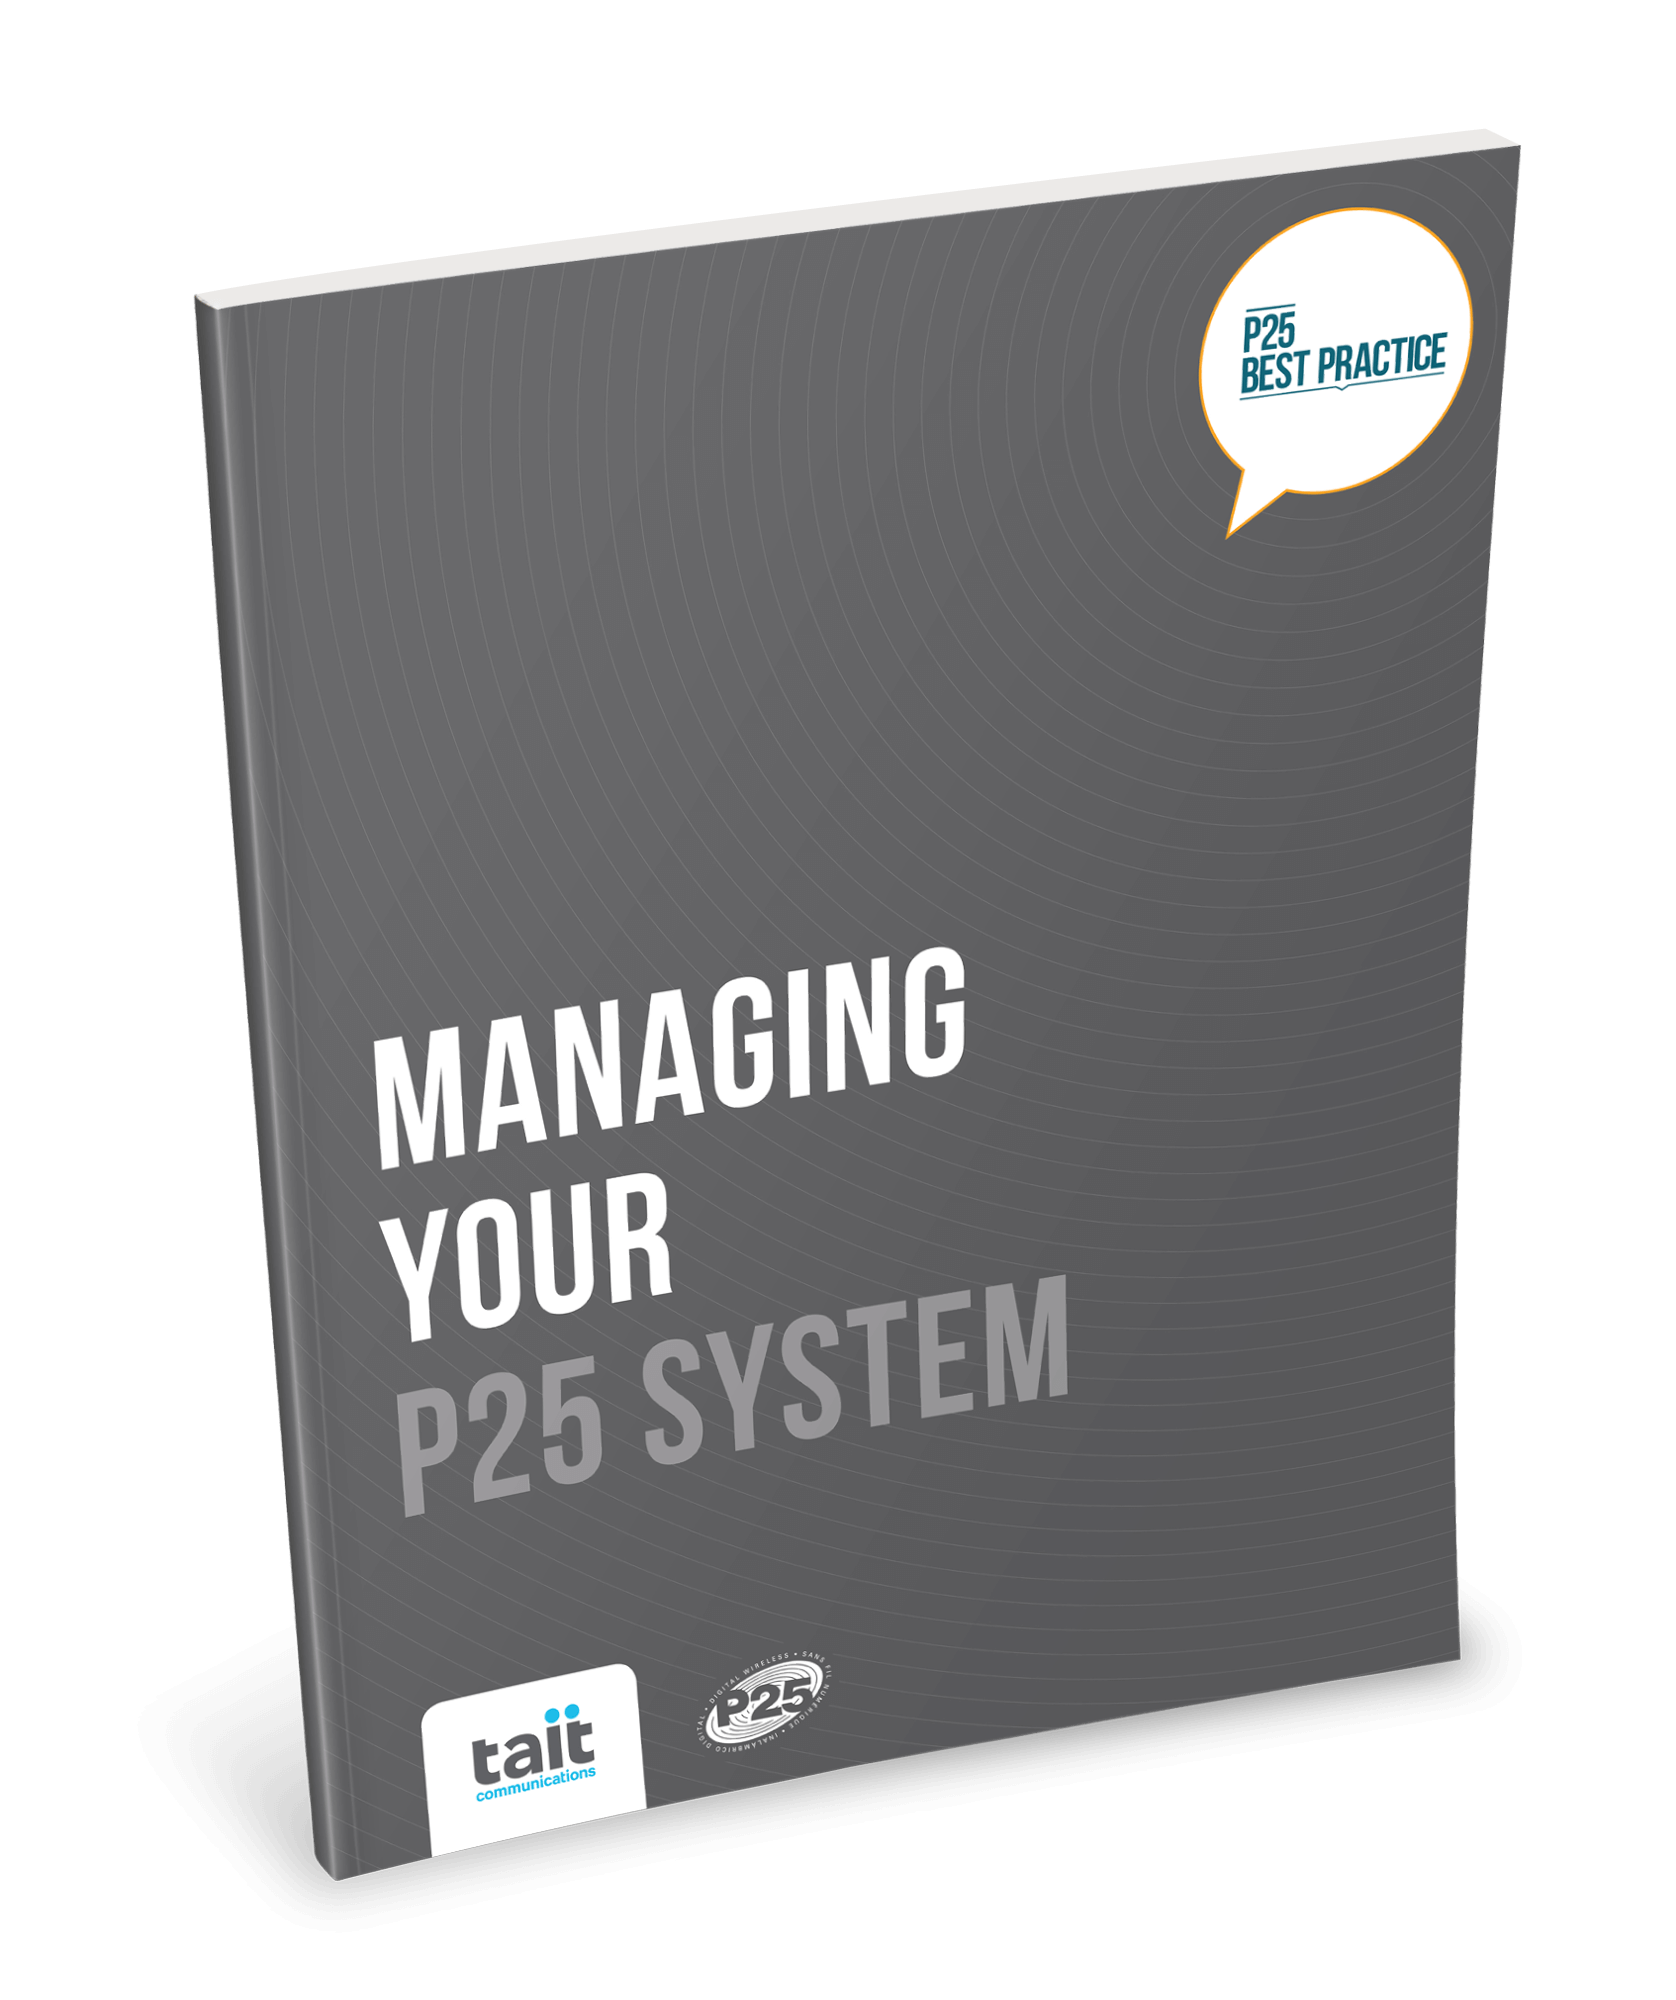 New Guide P25 Best Practice- Managing your p25 system